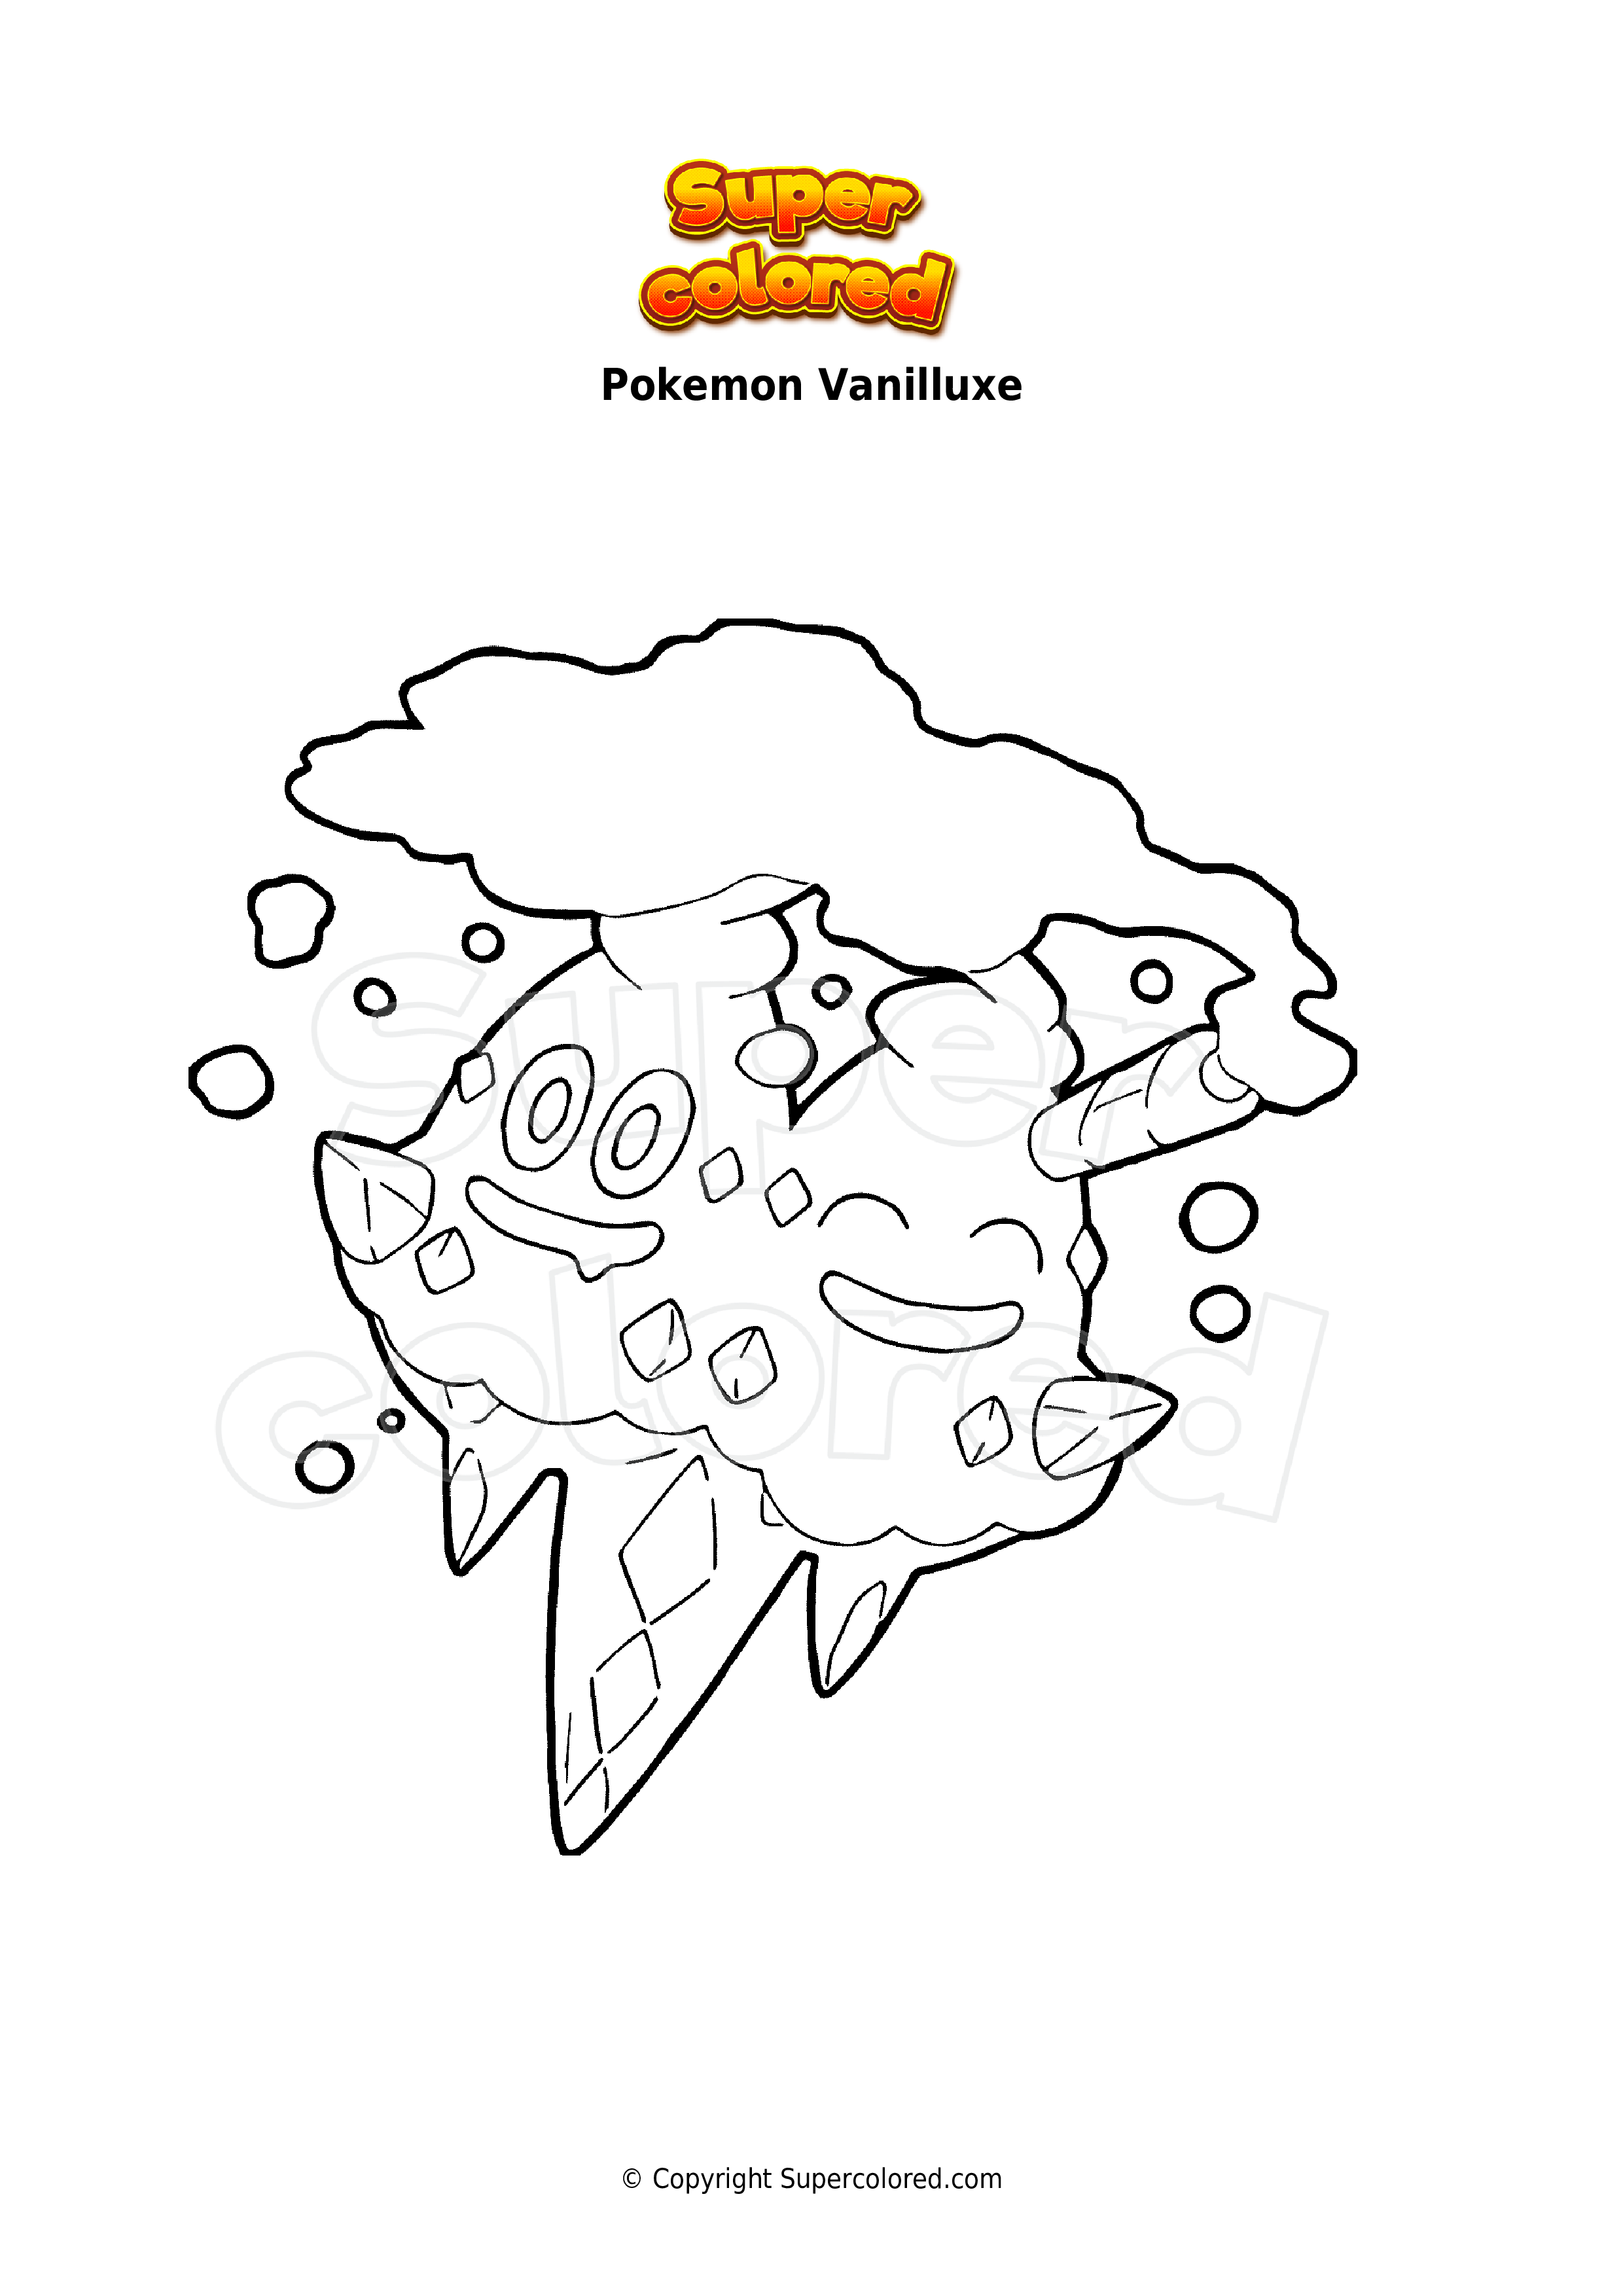 Supercoloring Vulpix - Download Printable Pokemon Coloring Pages Using